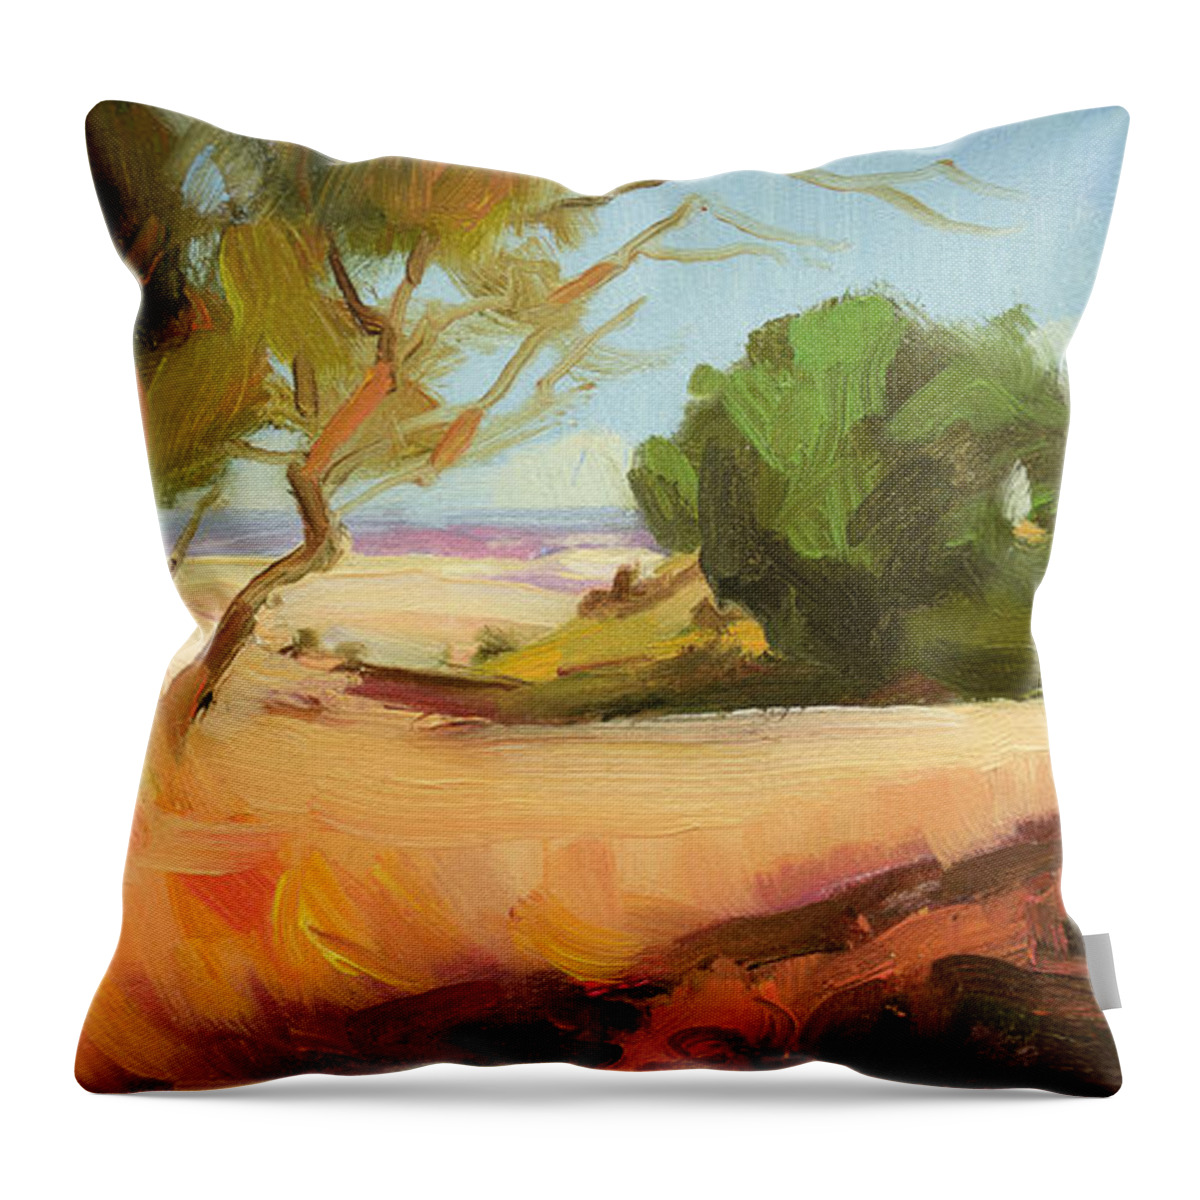 Landscape Throw Pillow featuring the painting Harvest Time by Steve Henderson